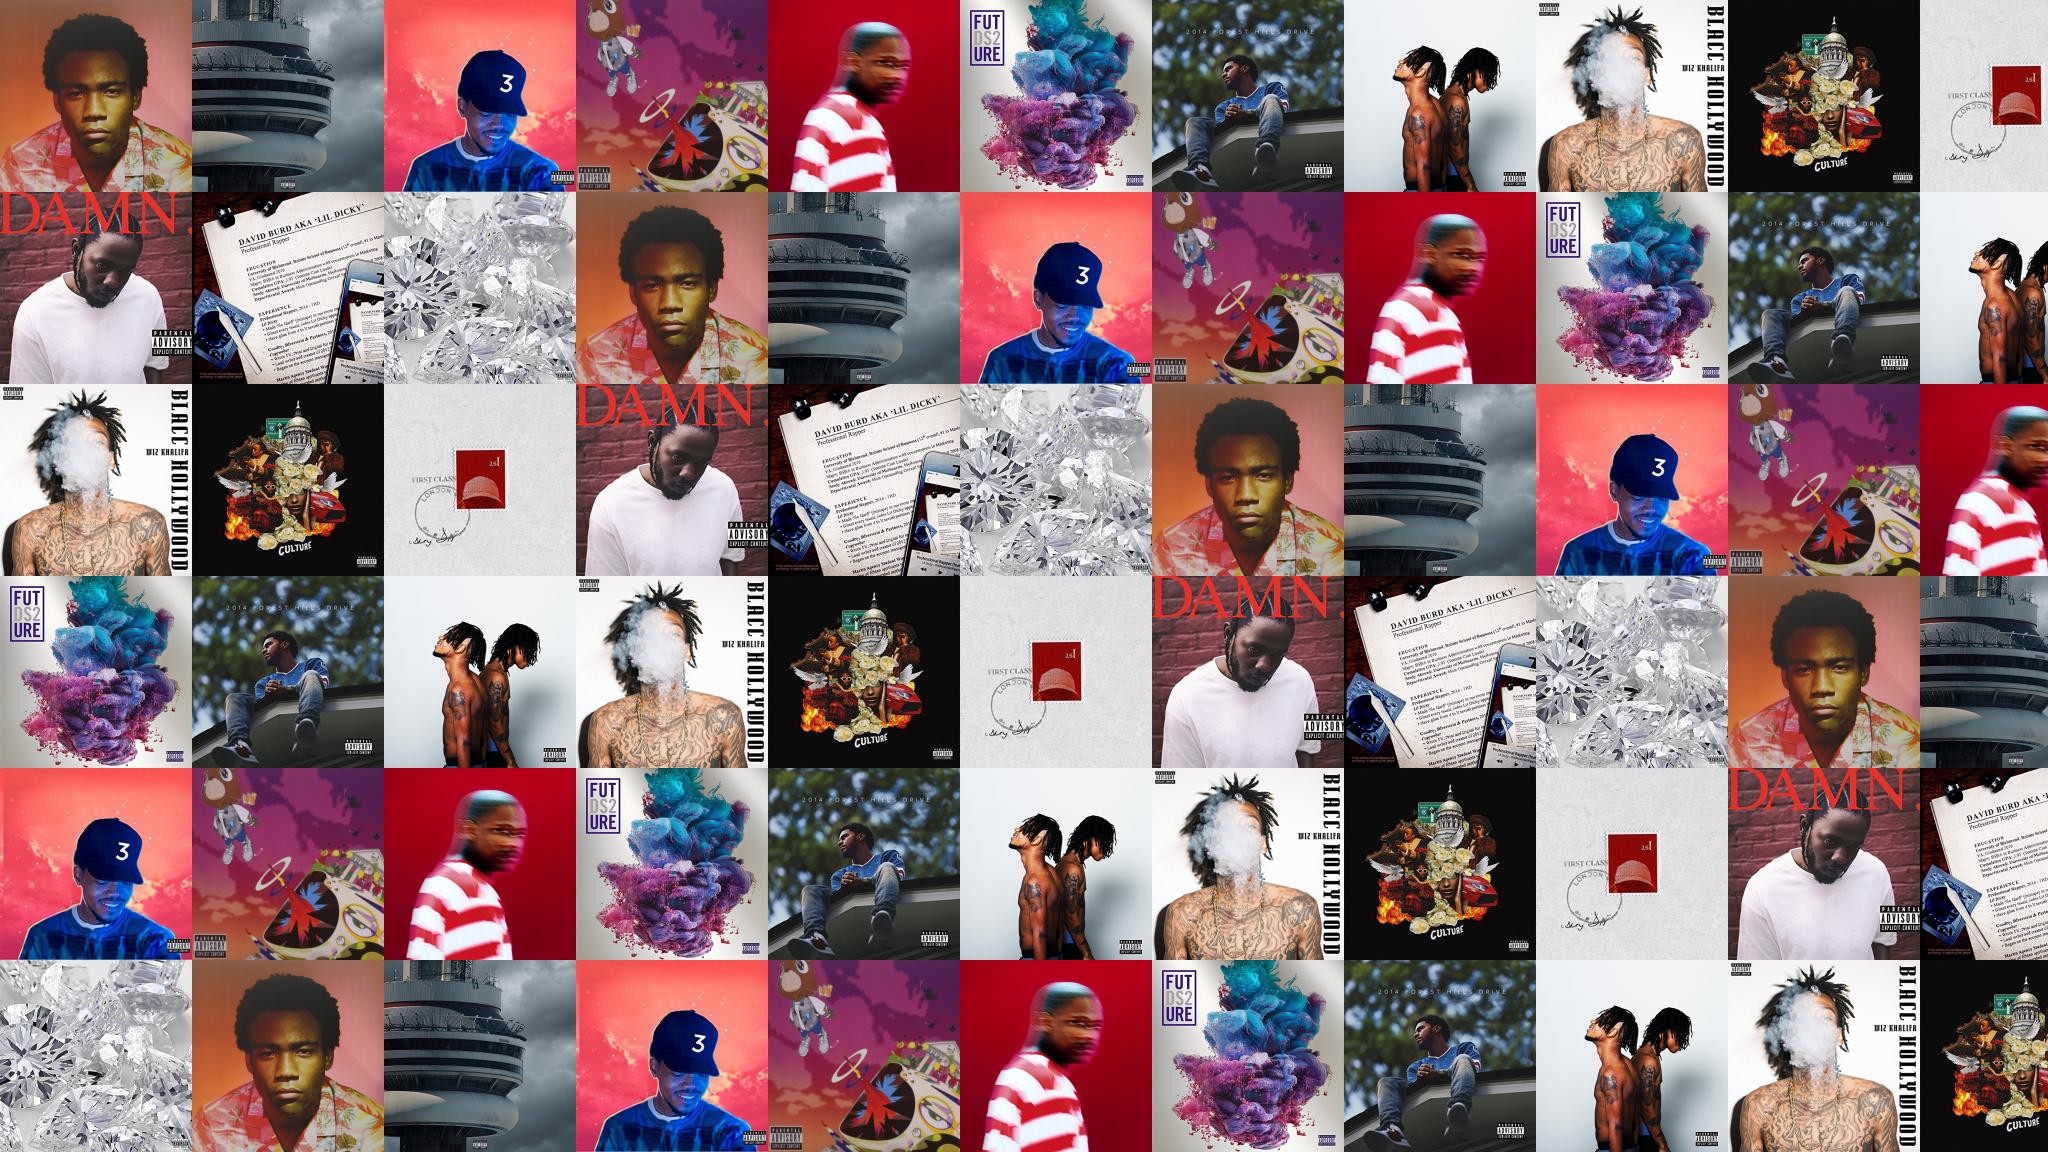 Download this free wallpaper with images of Childish Gambino Because Of The Internet, Drake Views, Chance The Rapper Coloring Book, Kanye West